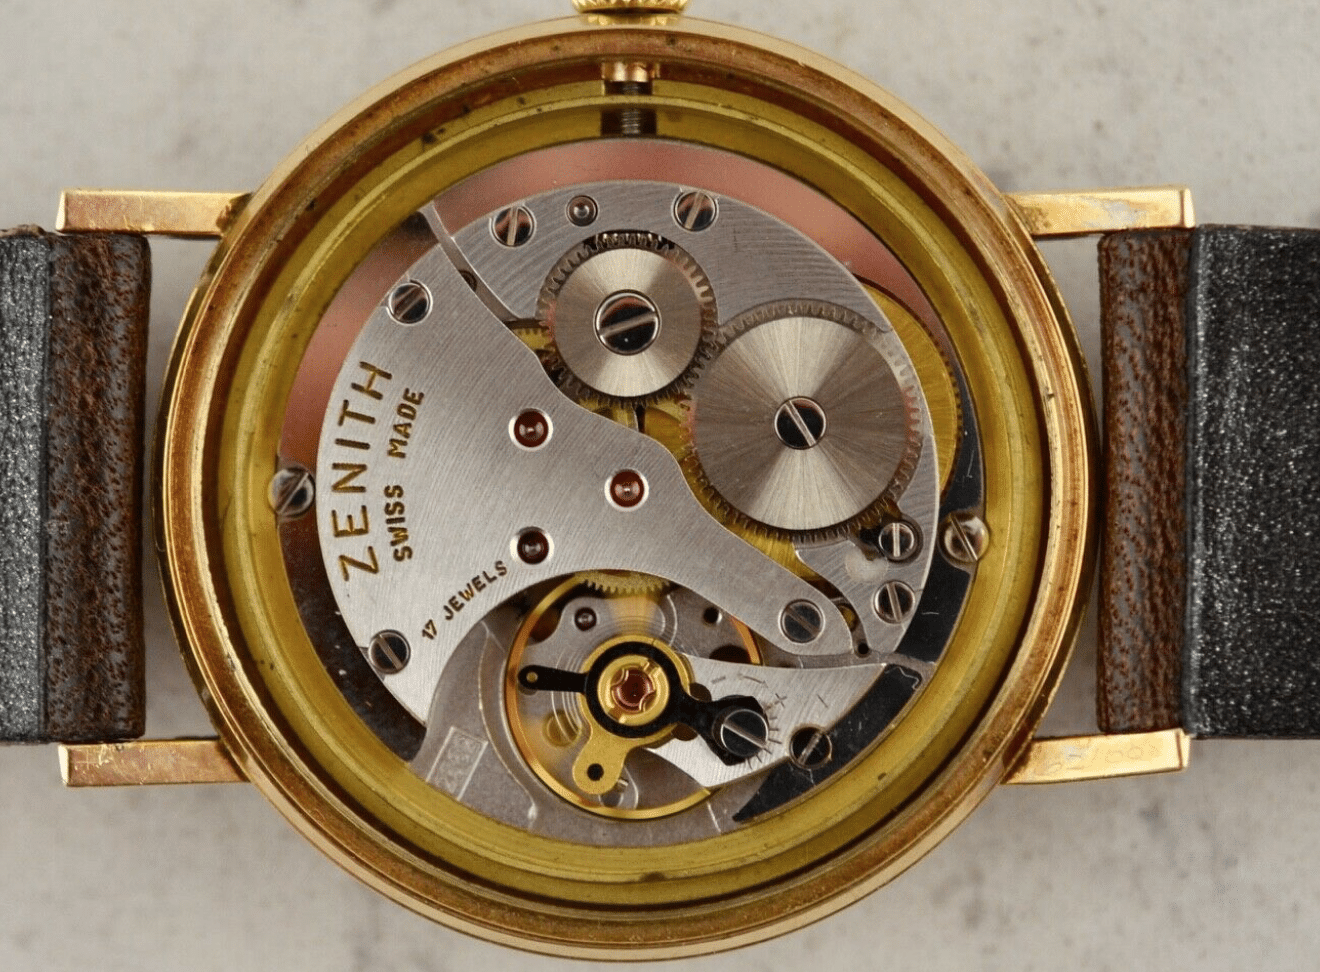 Zenith-caliber-2562-movement-specifications